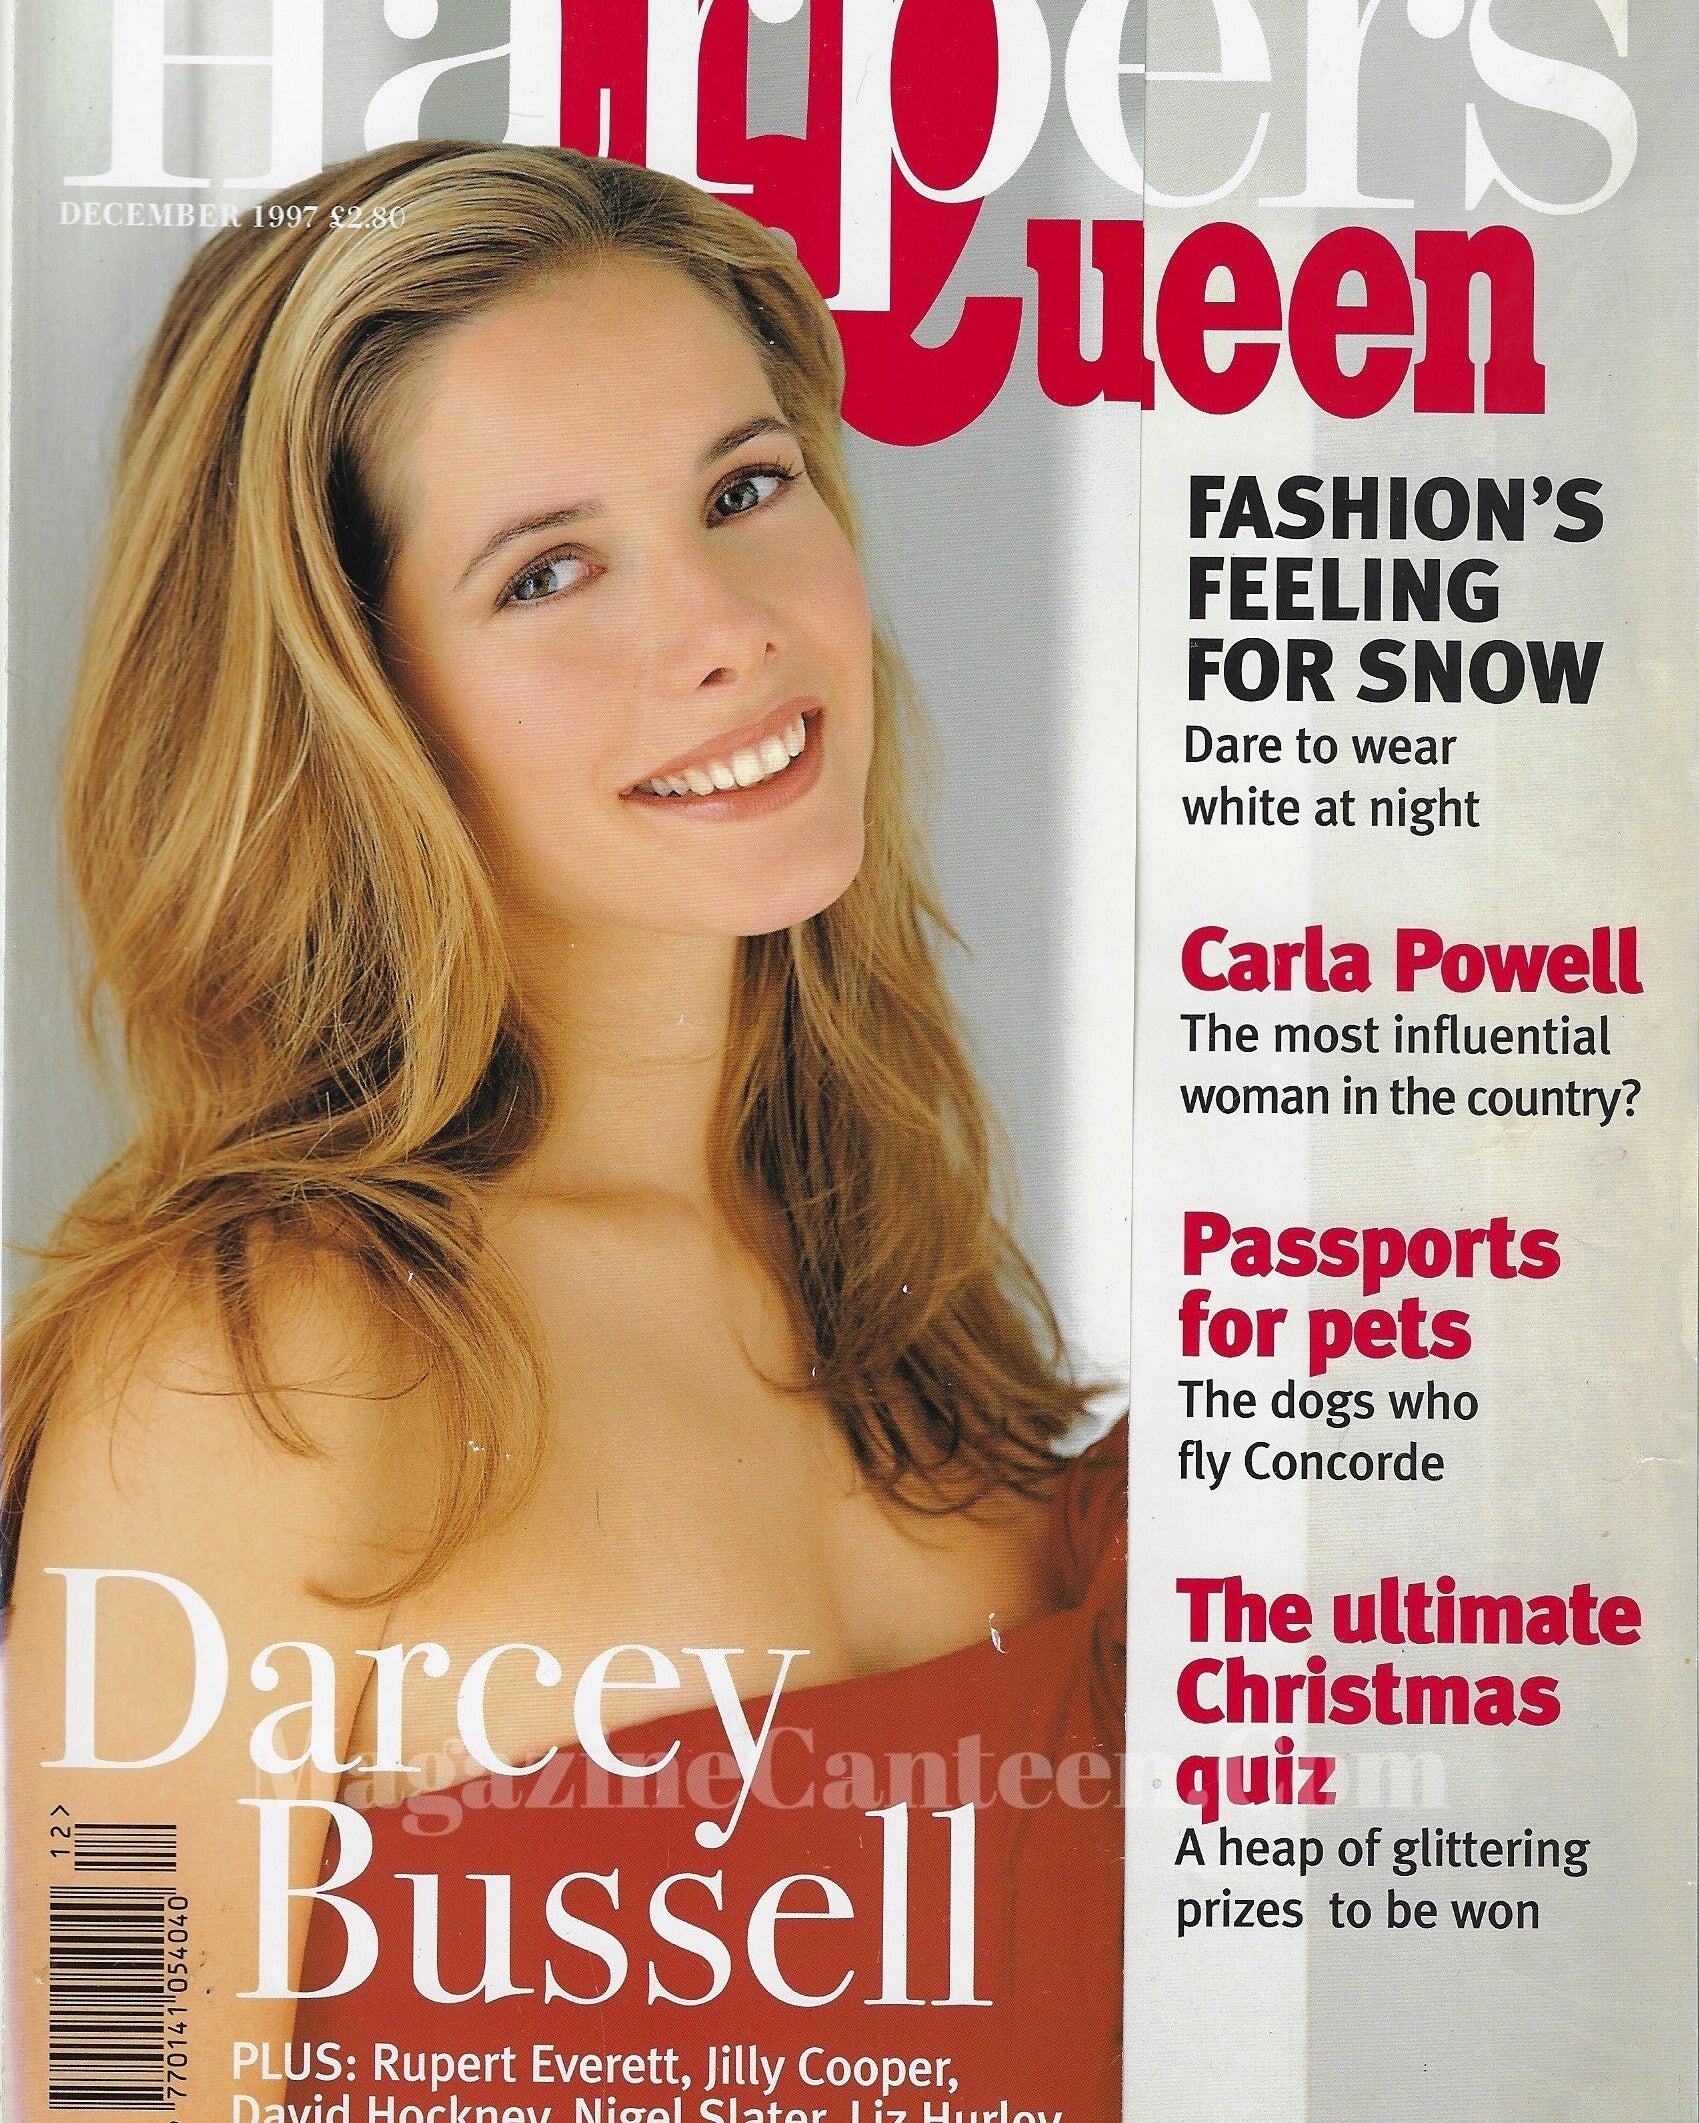 Harpers & Queen Magazine - Darcey Bussell